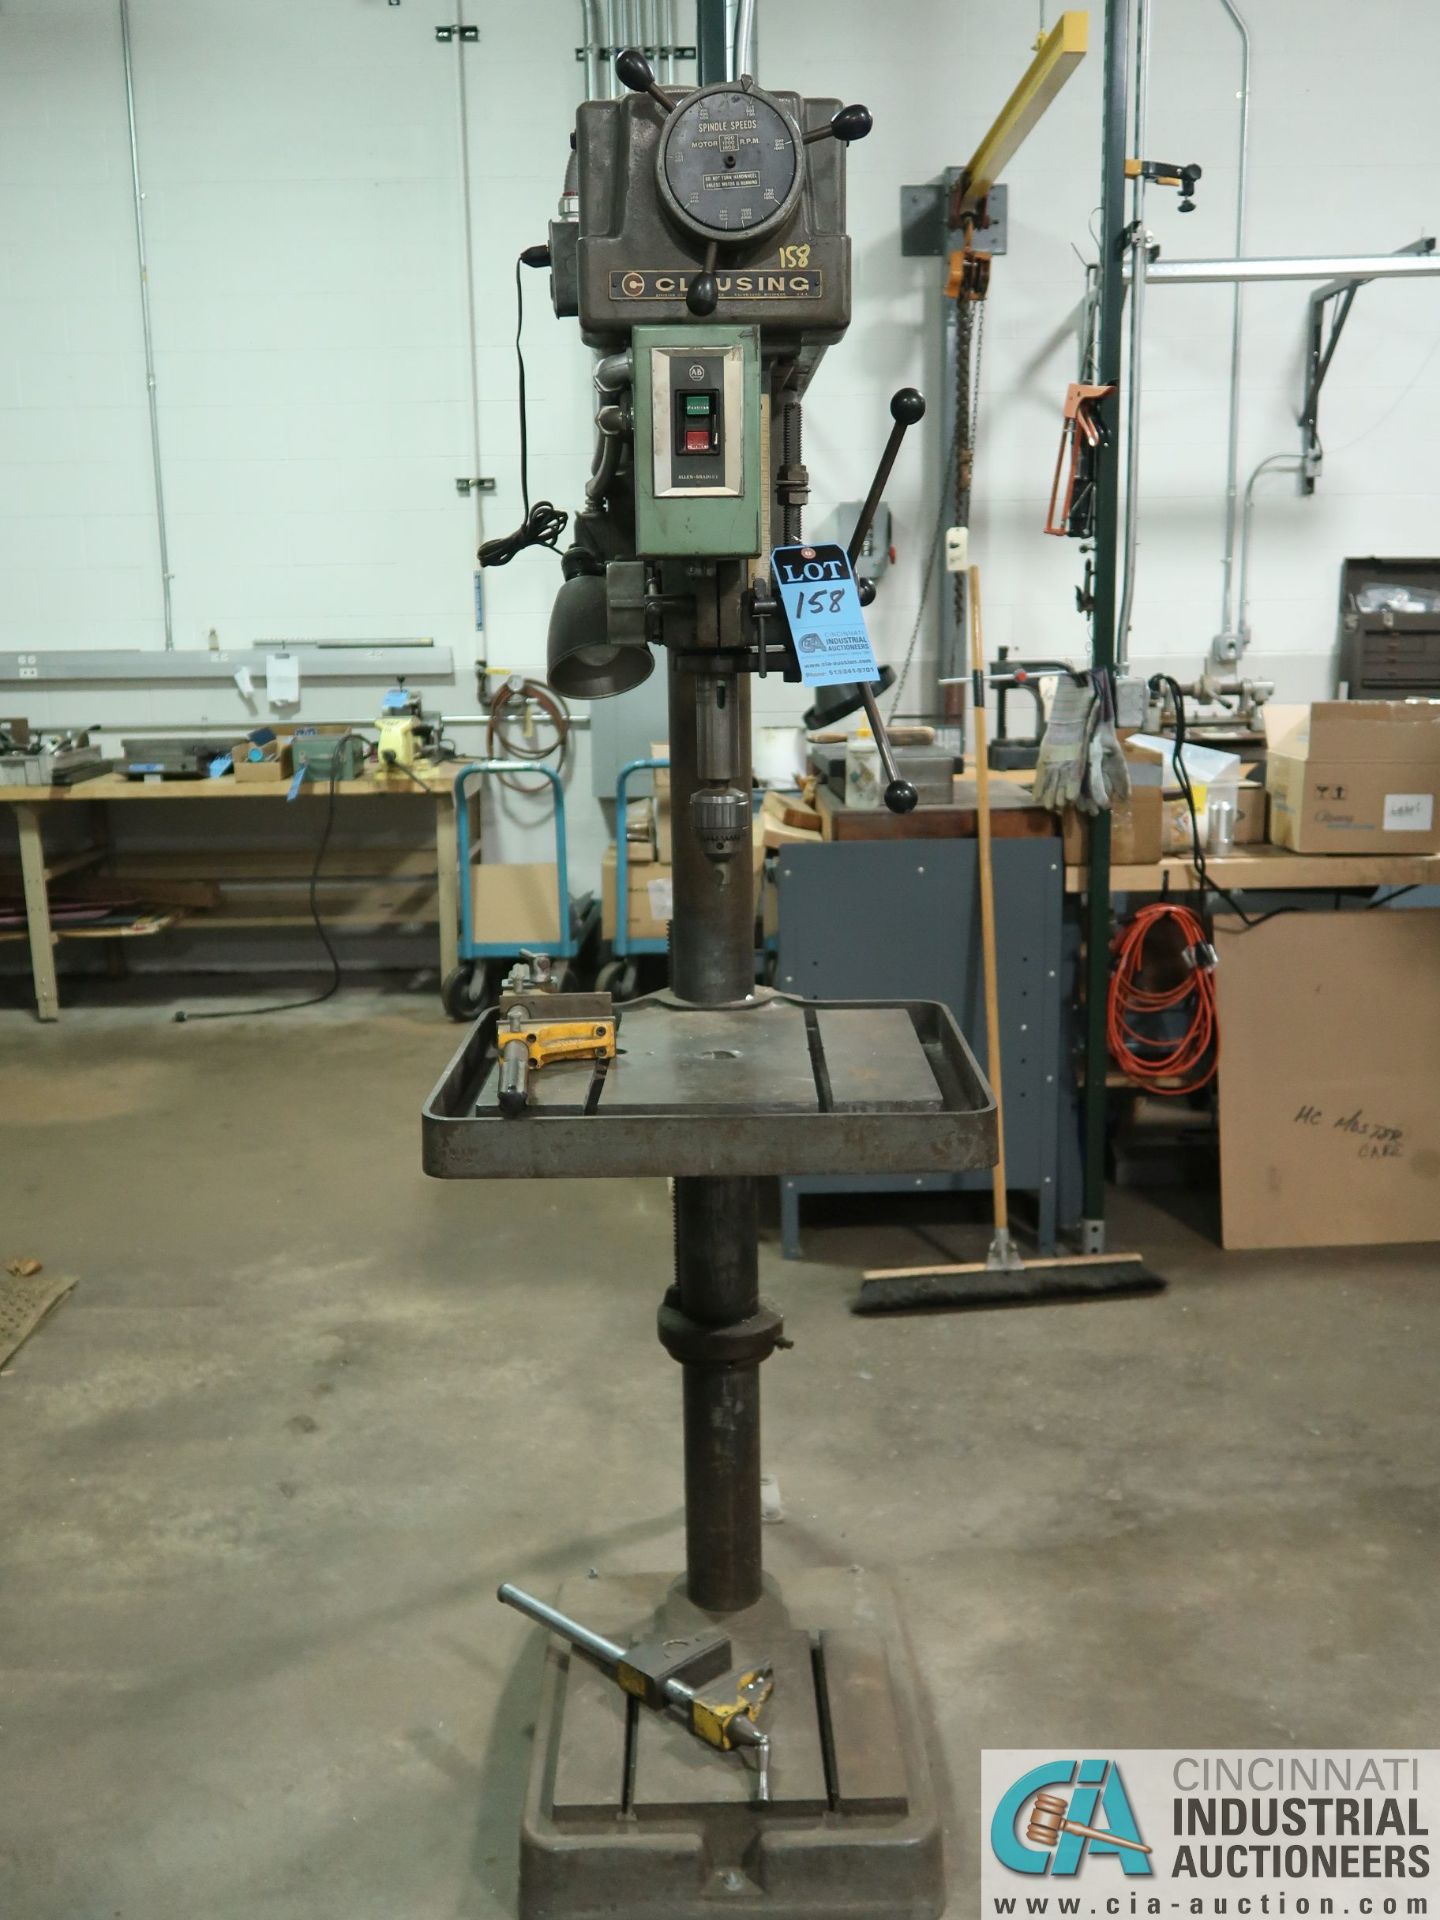 20" CLAUSING SERIES 22V SINGLE SPINDLE FLOOR DRILL; S/N 500699, 150 - 2,000 RPM, 15-1/2" X 18" - Image 2 of 8